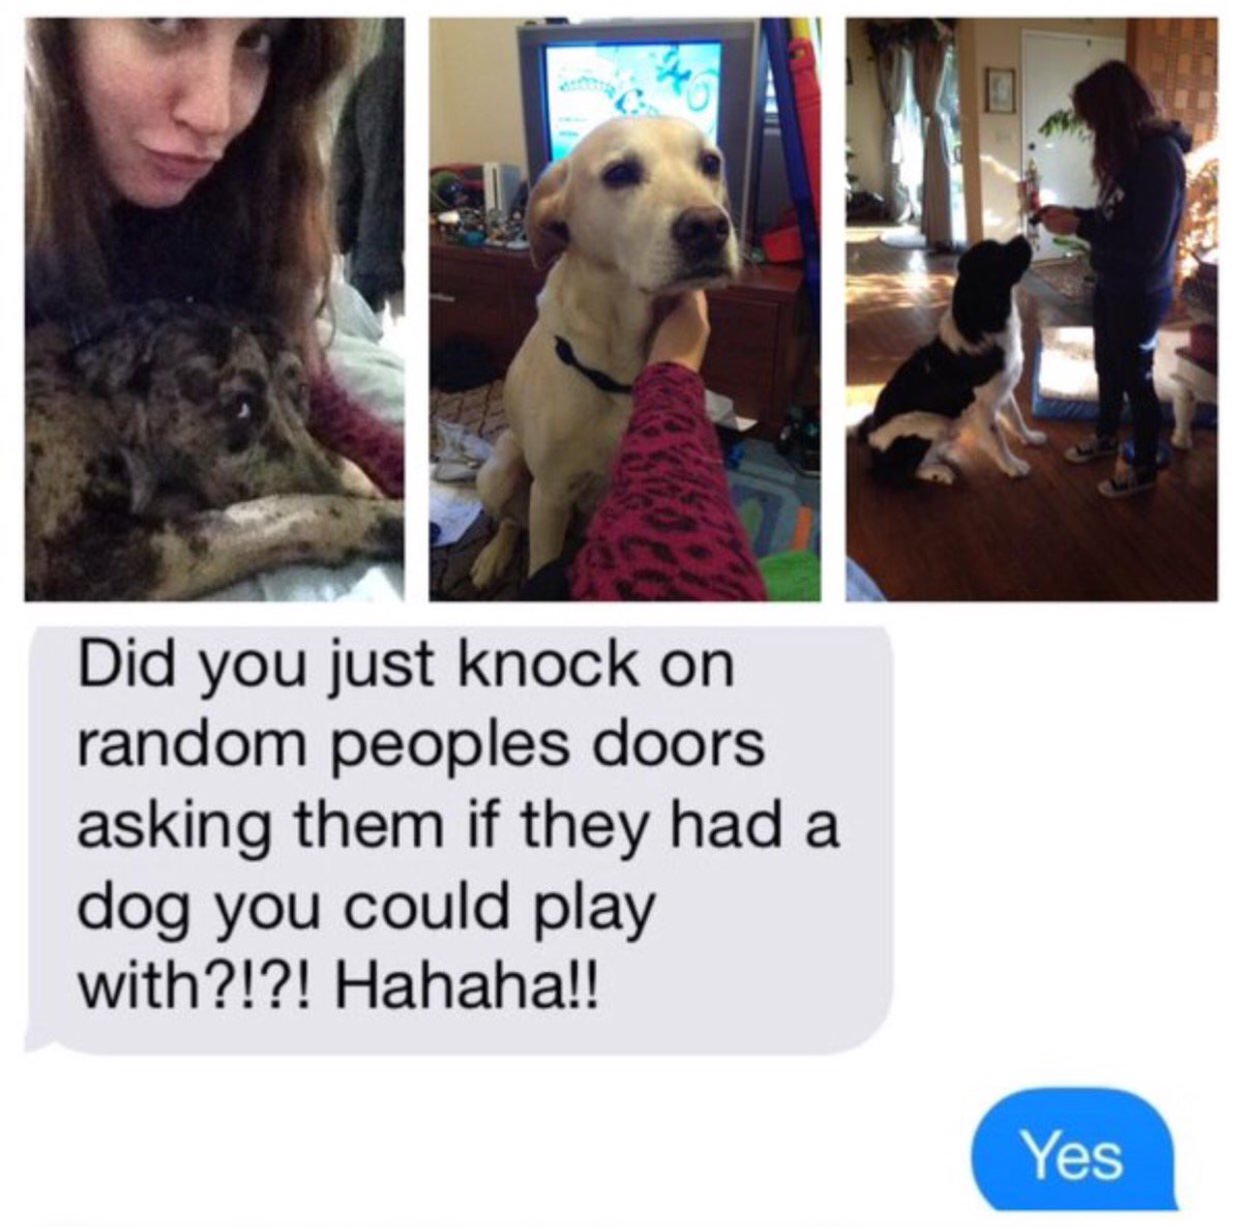 dog - Did you just knock on random peoples doors asking them if they had a dog you could play with?!?! Hahaha!! Yes